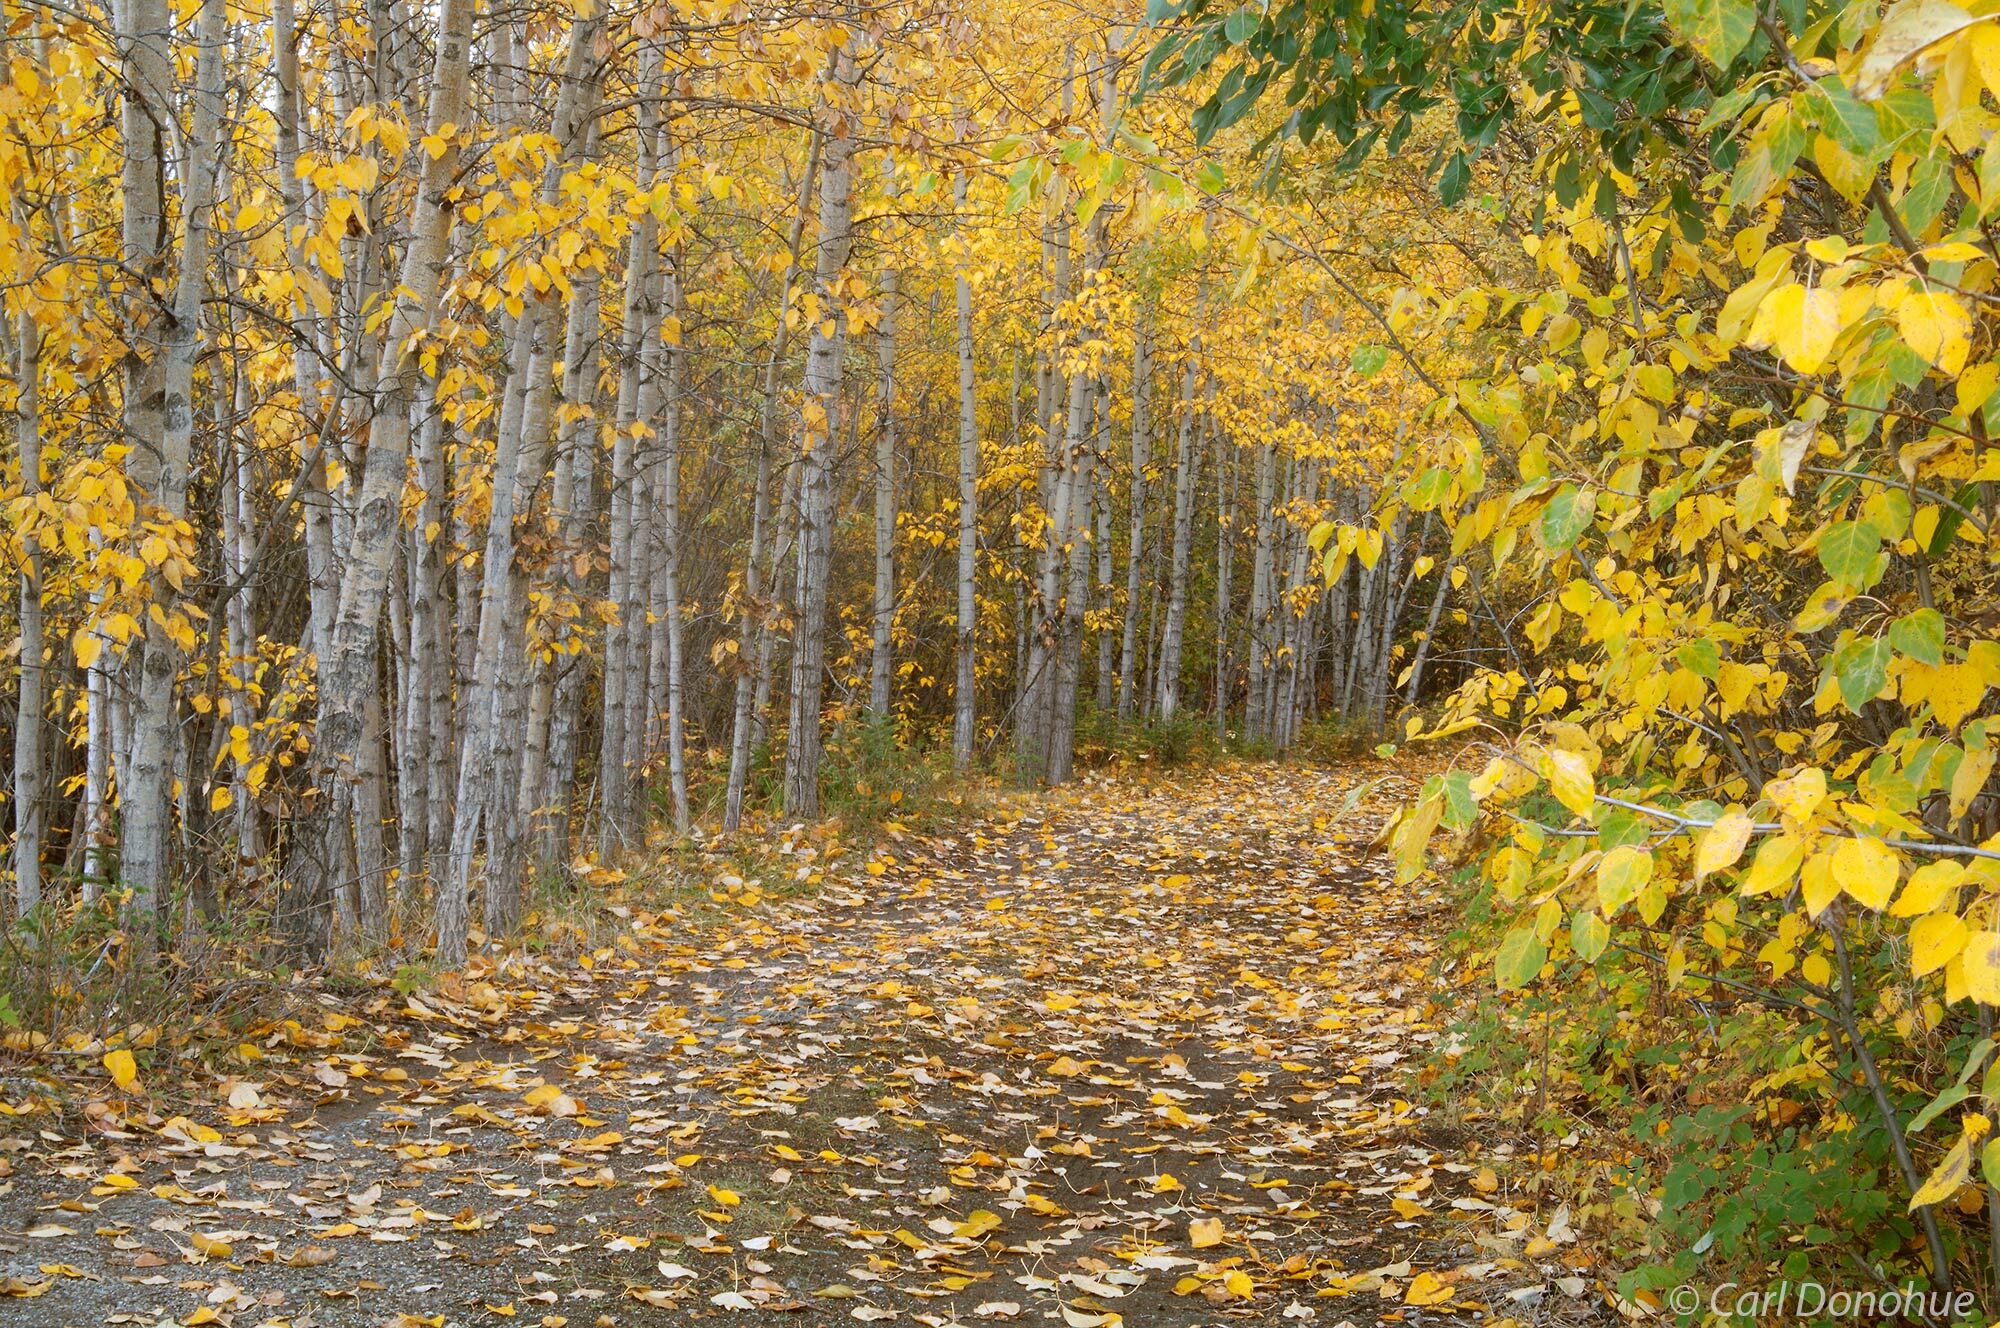 Fall brings color to the boreal forest of Wrangell-St Elias National Park, Alaska.